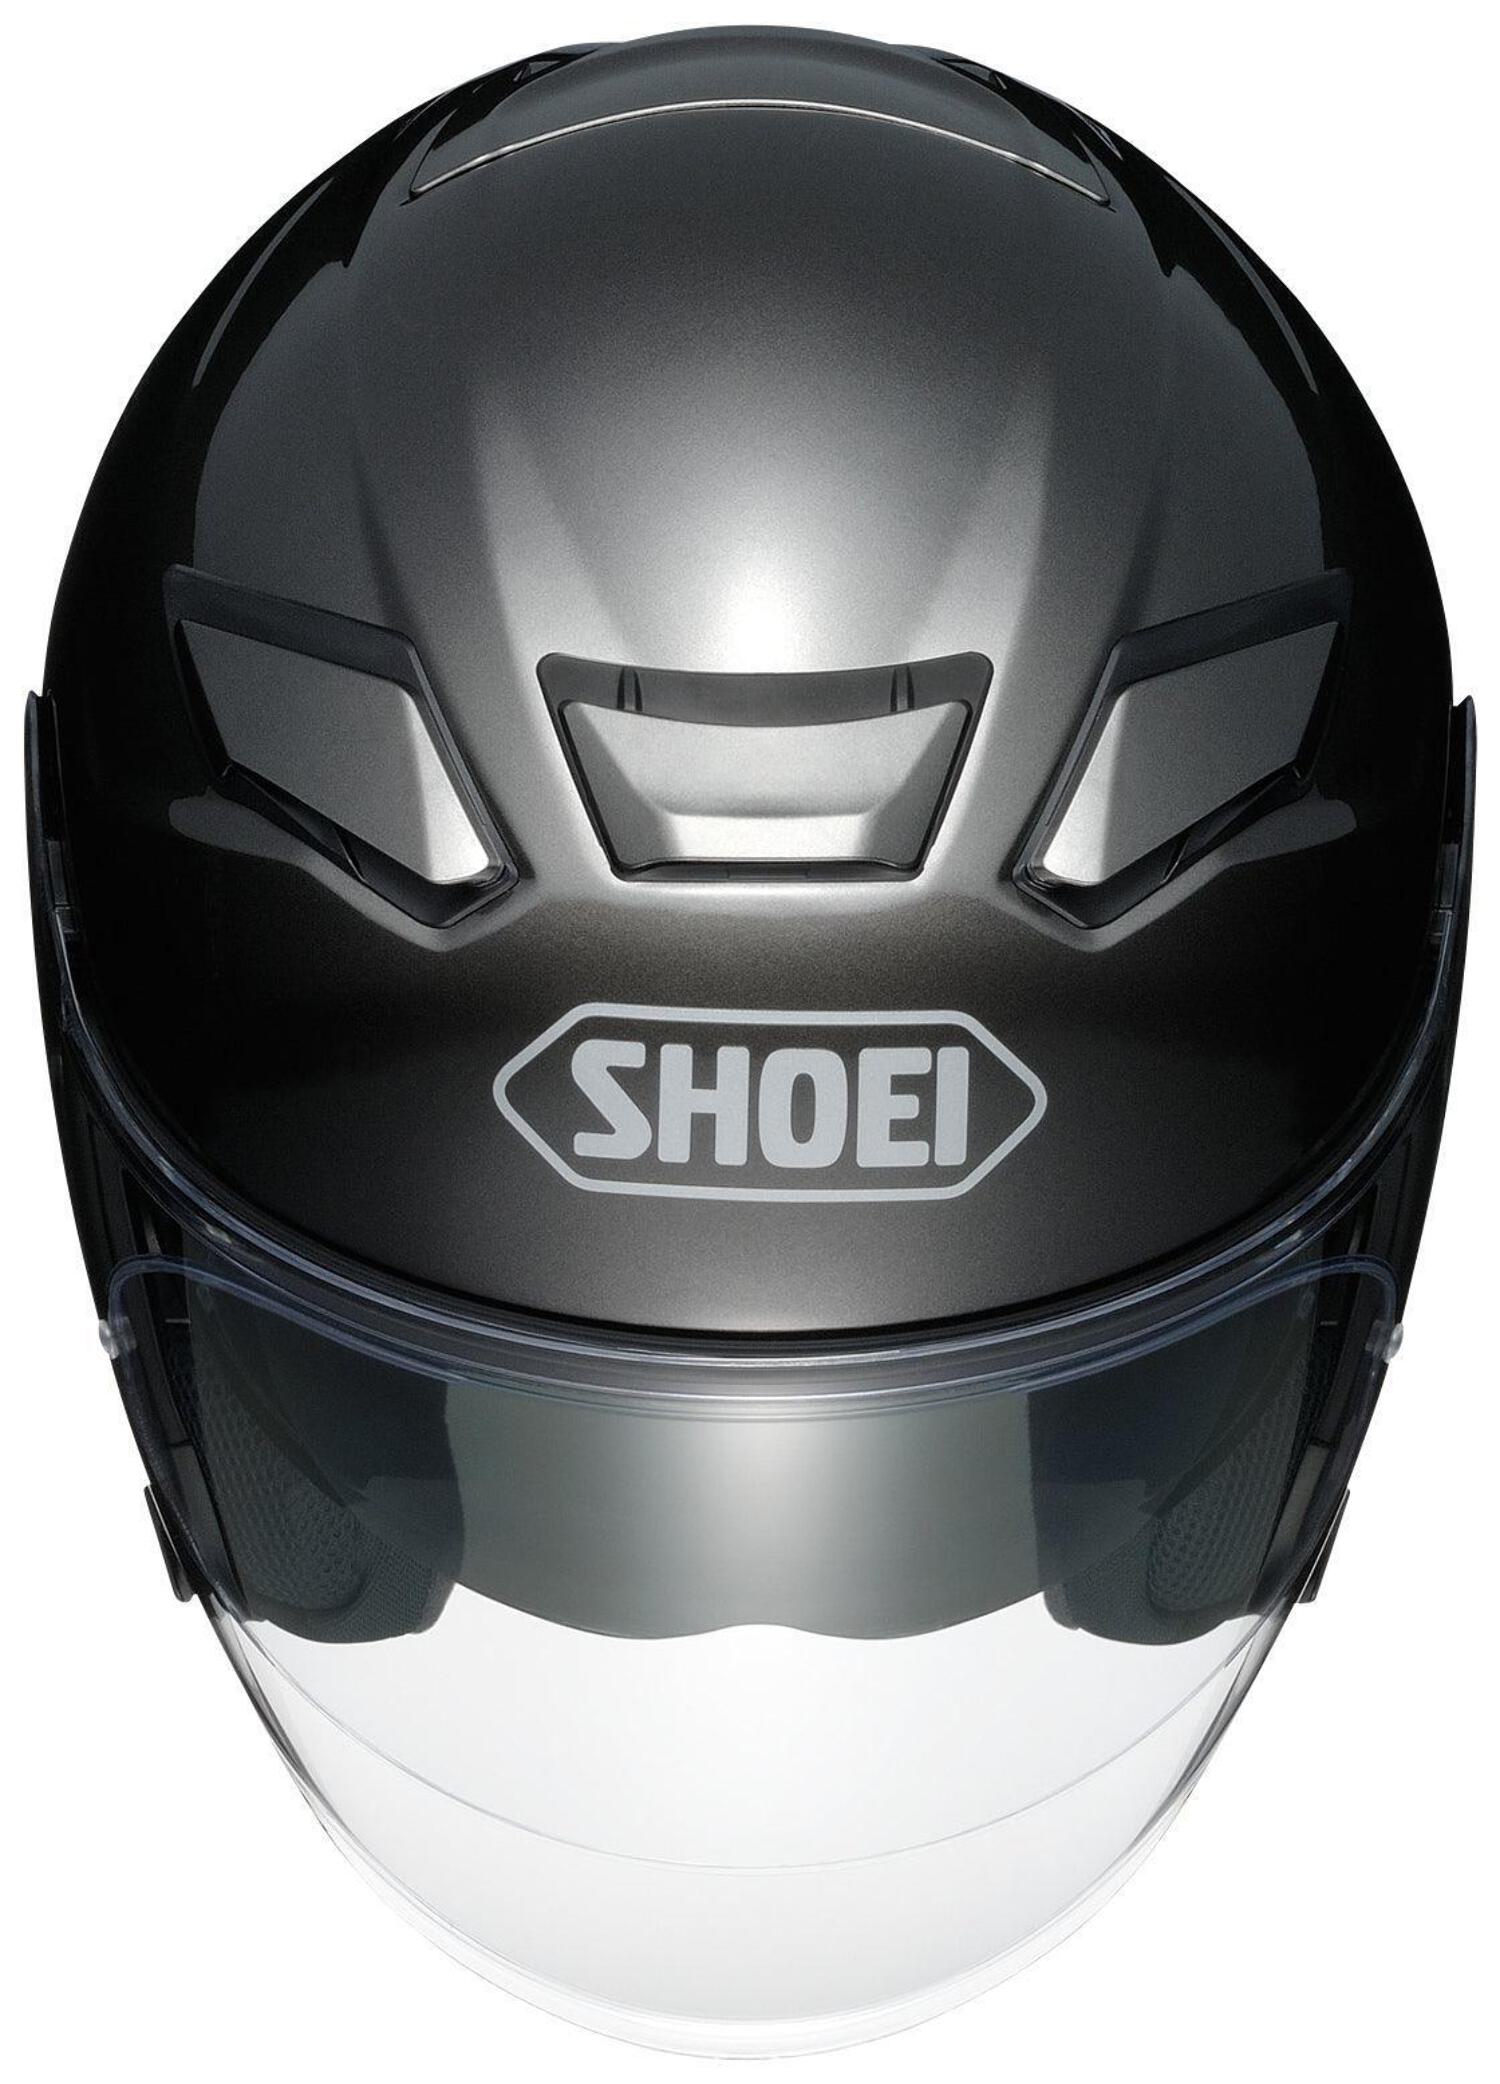 Shoei J-Cruise II Open-Face Helmet - Anthracite - image 5 of 8